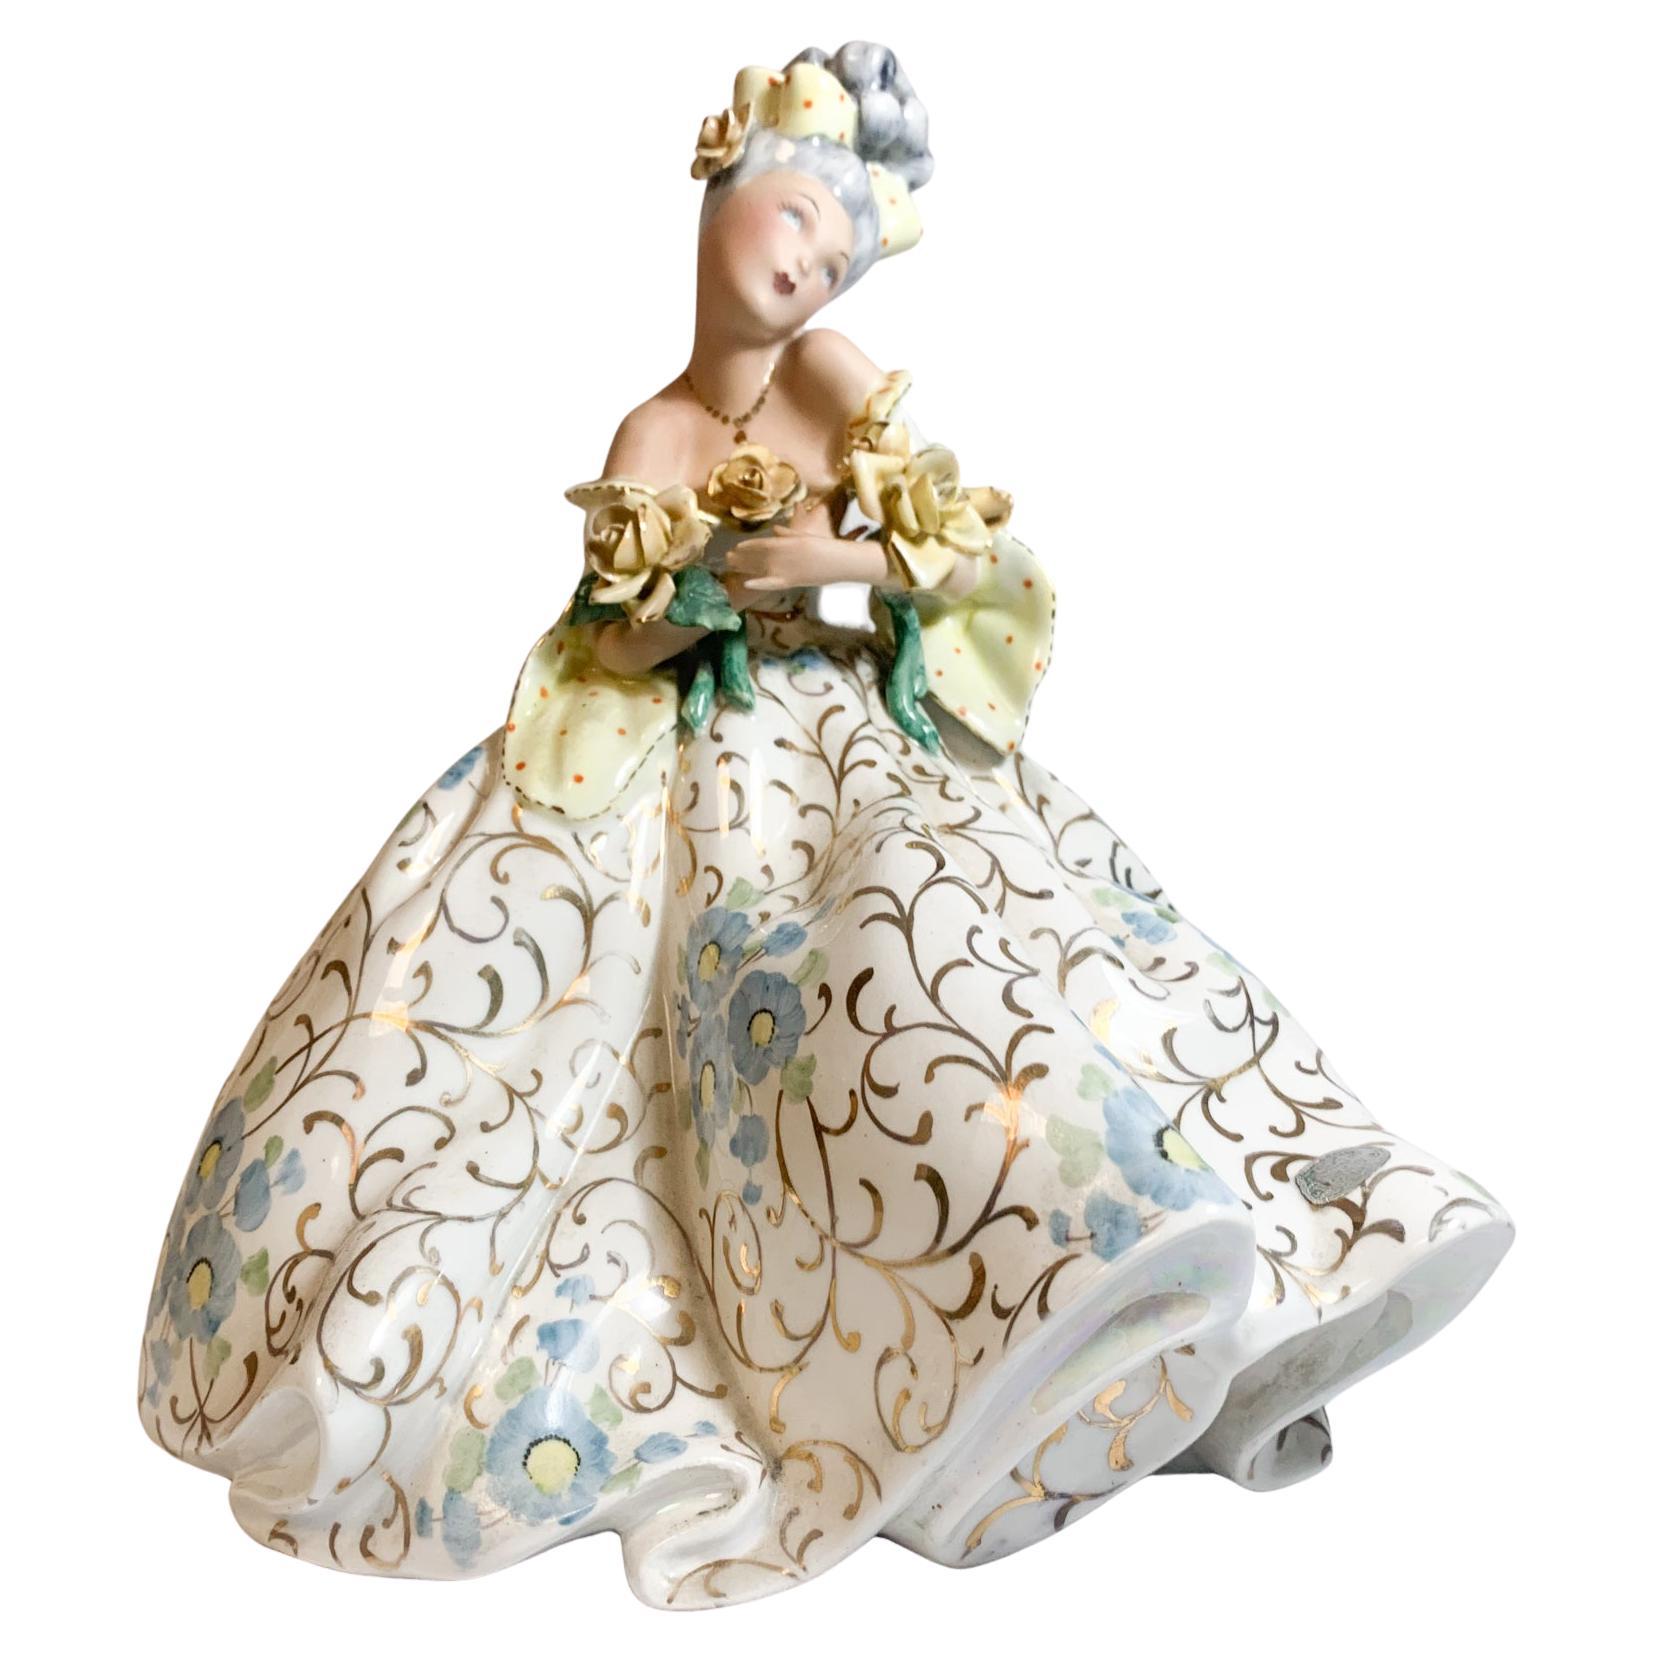 Ceramic Statue of a Lady with Iridescent Details by Tiziano Galli from the 1950s For Sale